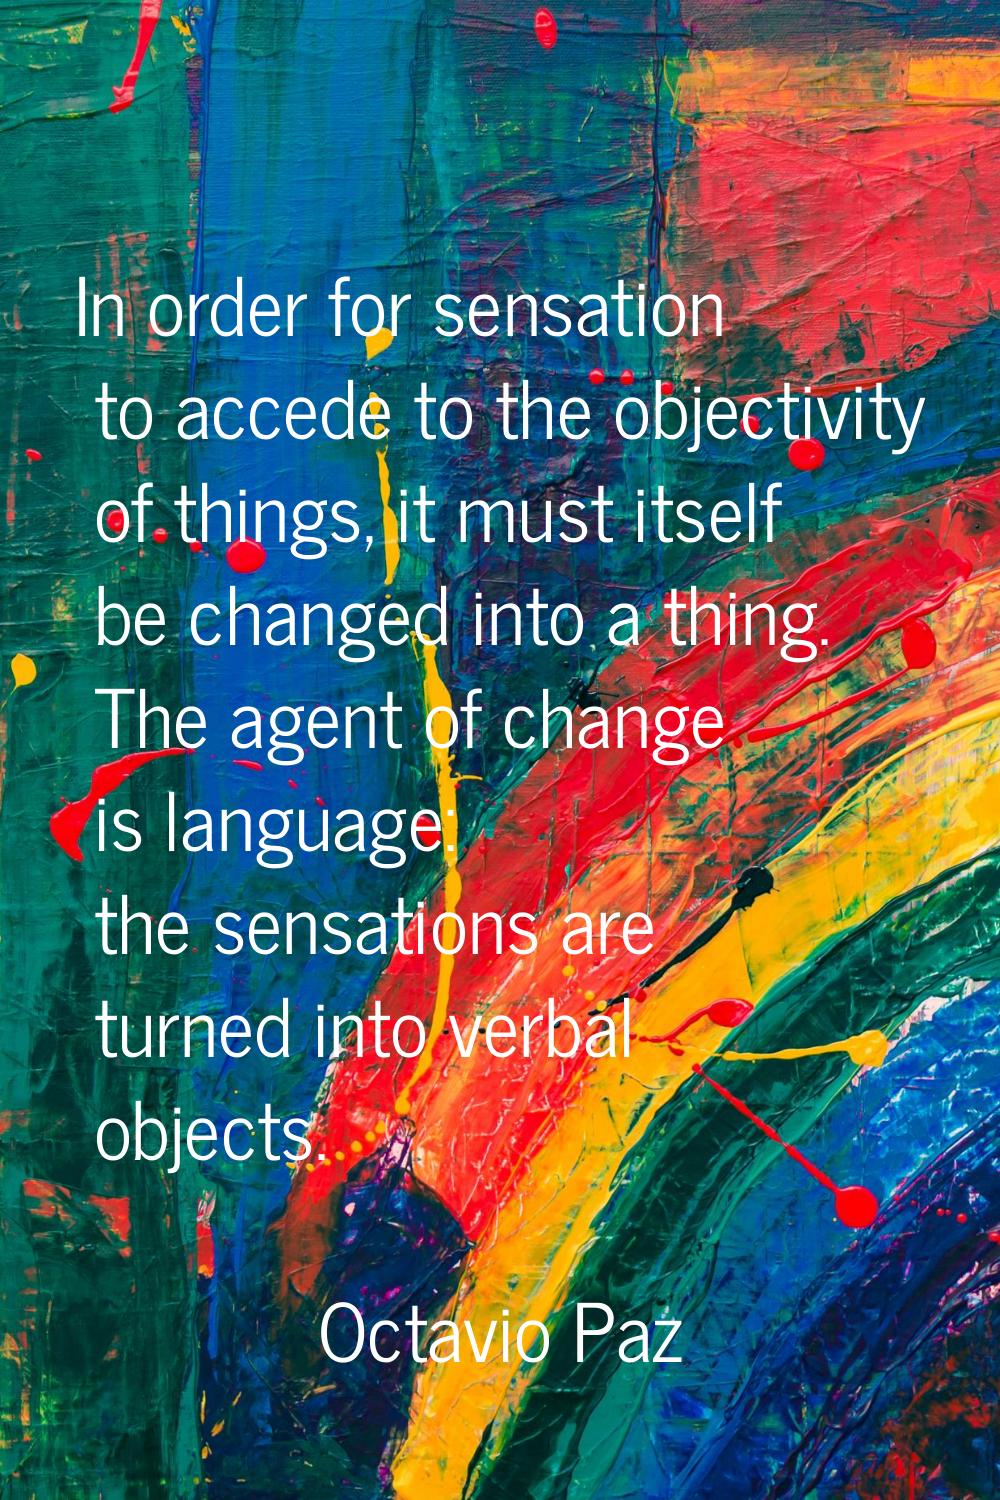 In order for sensation to accede to the objectivity of things, it must itself be changed into a thi